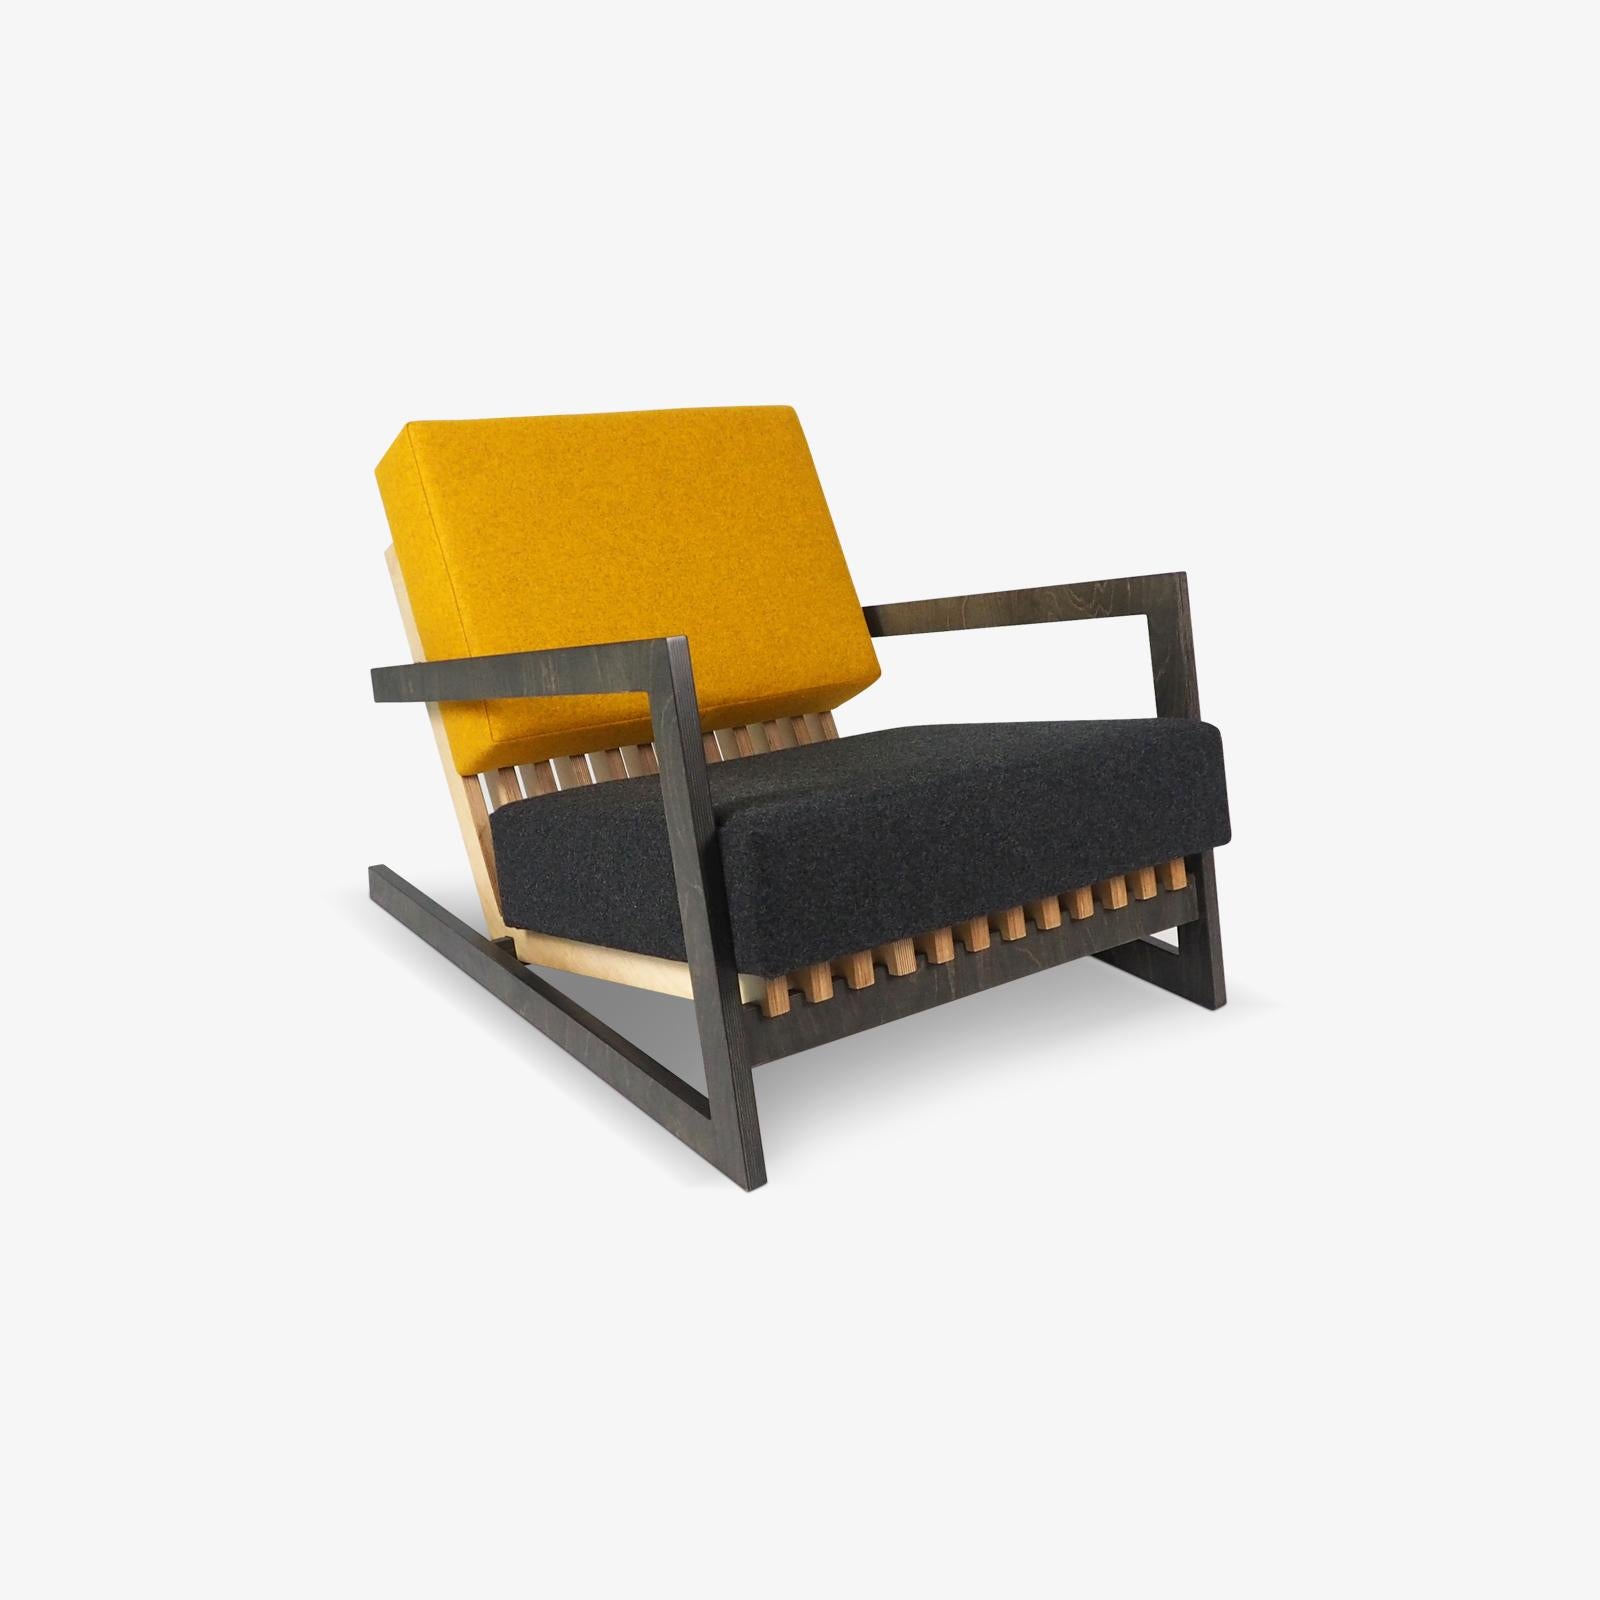 An iconic design that express the talented Nordic Design using Green Technology.
The unique arms of the chair embrace the whole piece, The minimalistic creased lines and the functional form are inspired by the New Nordic design in a culmination of